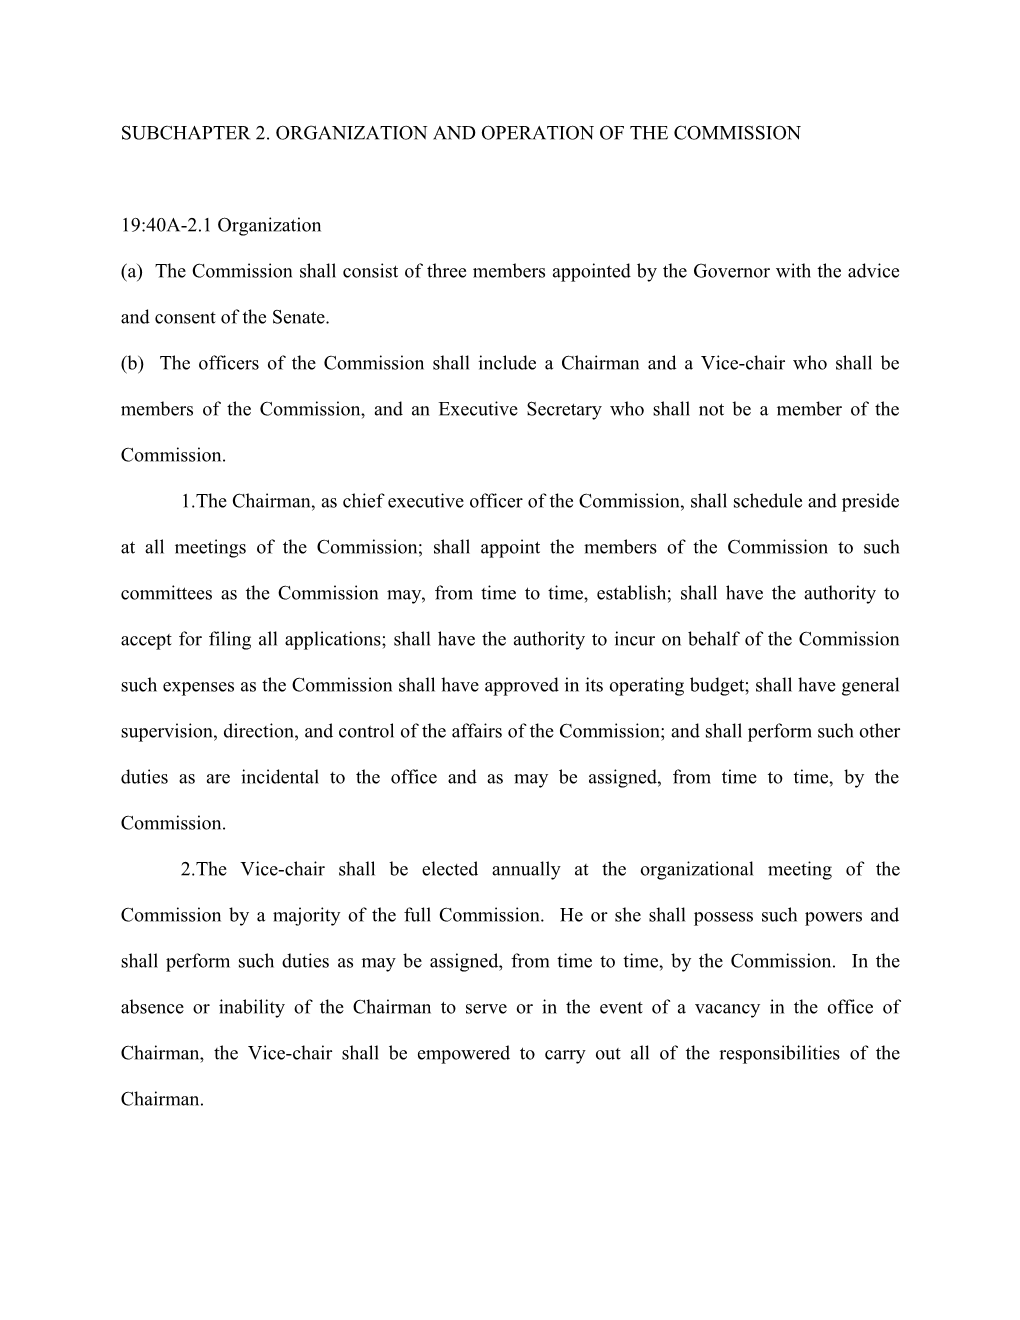 Subchapter 2. Organization and Operation of the Commission